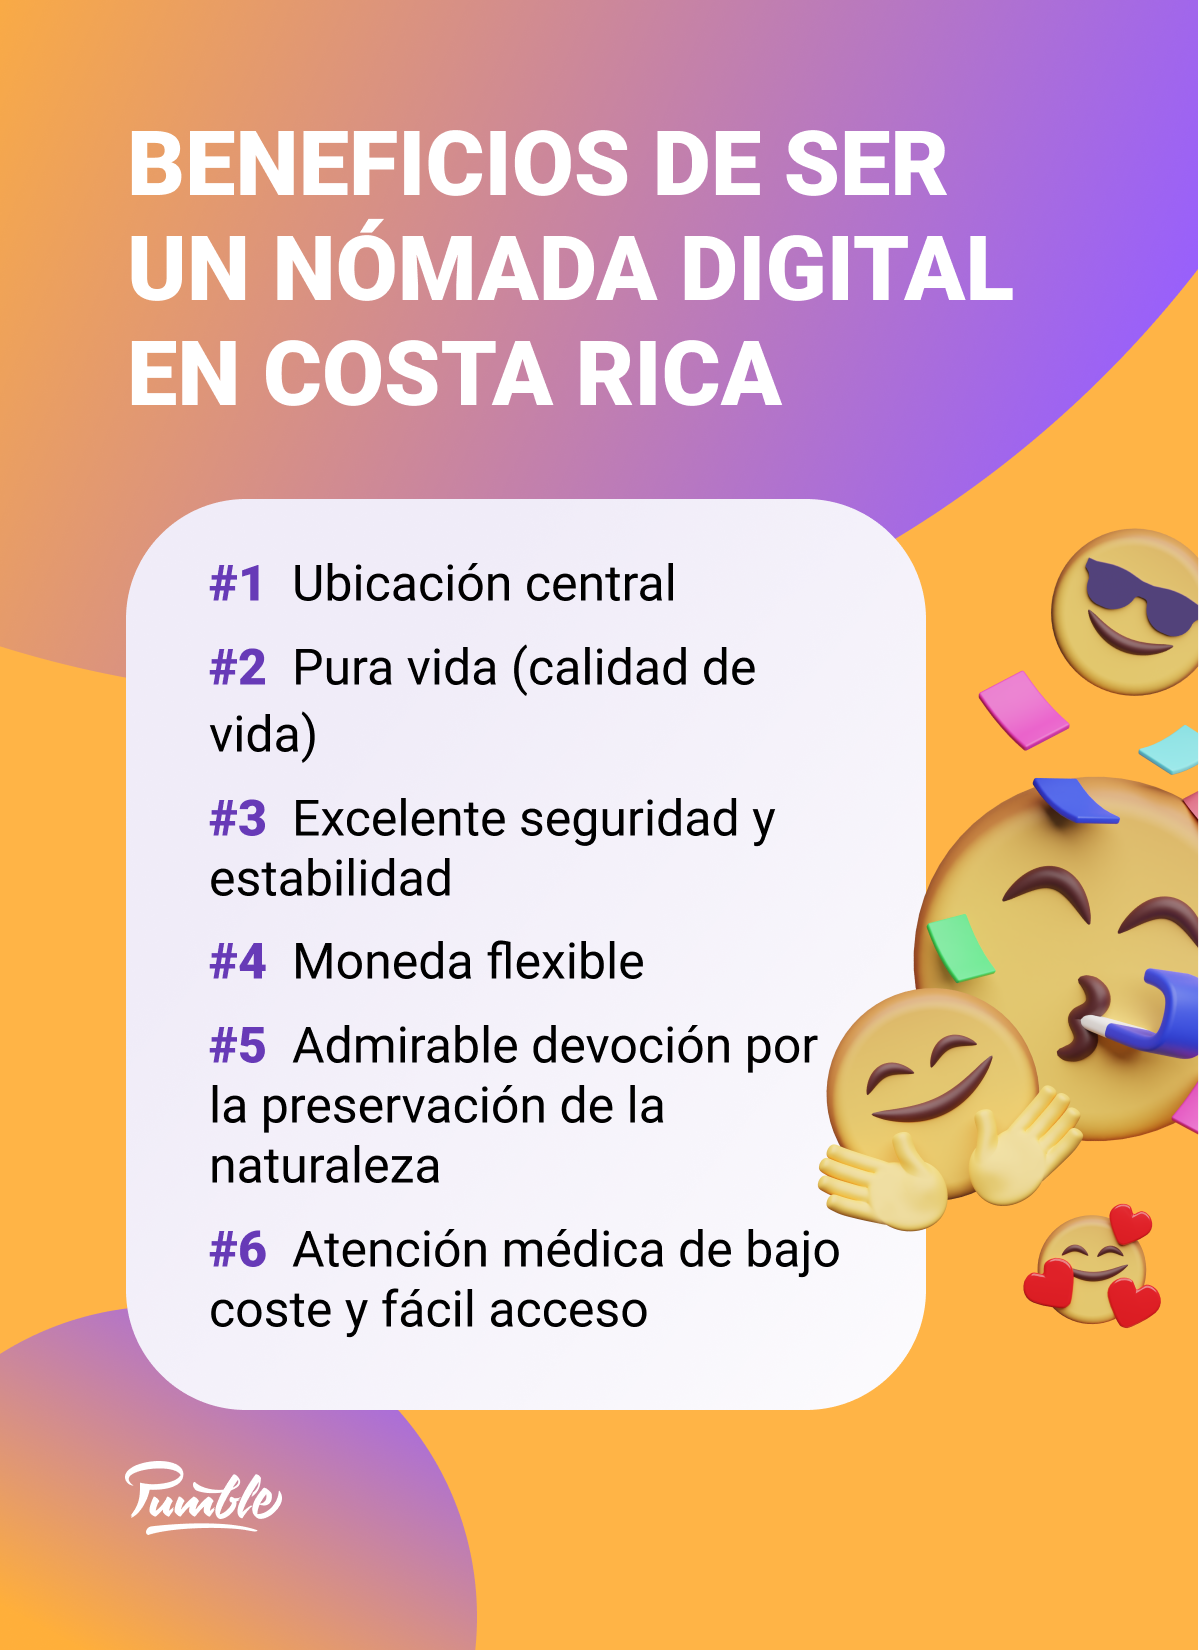 Benefits of being a digital nomad in Costa Rica